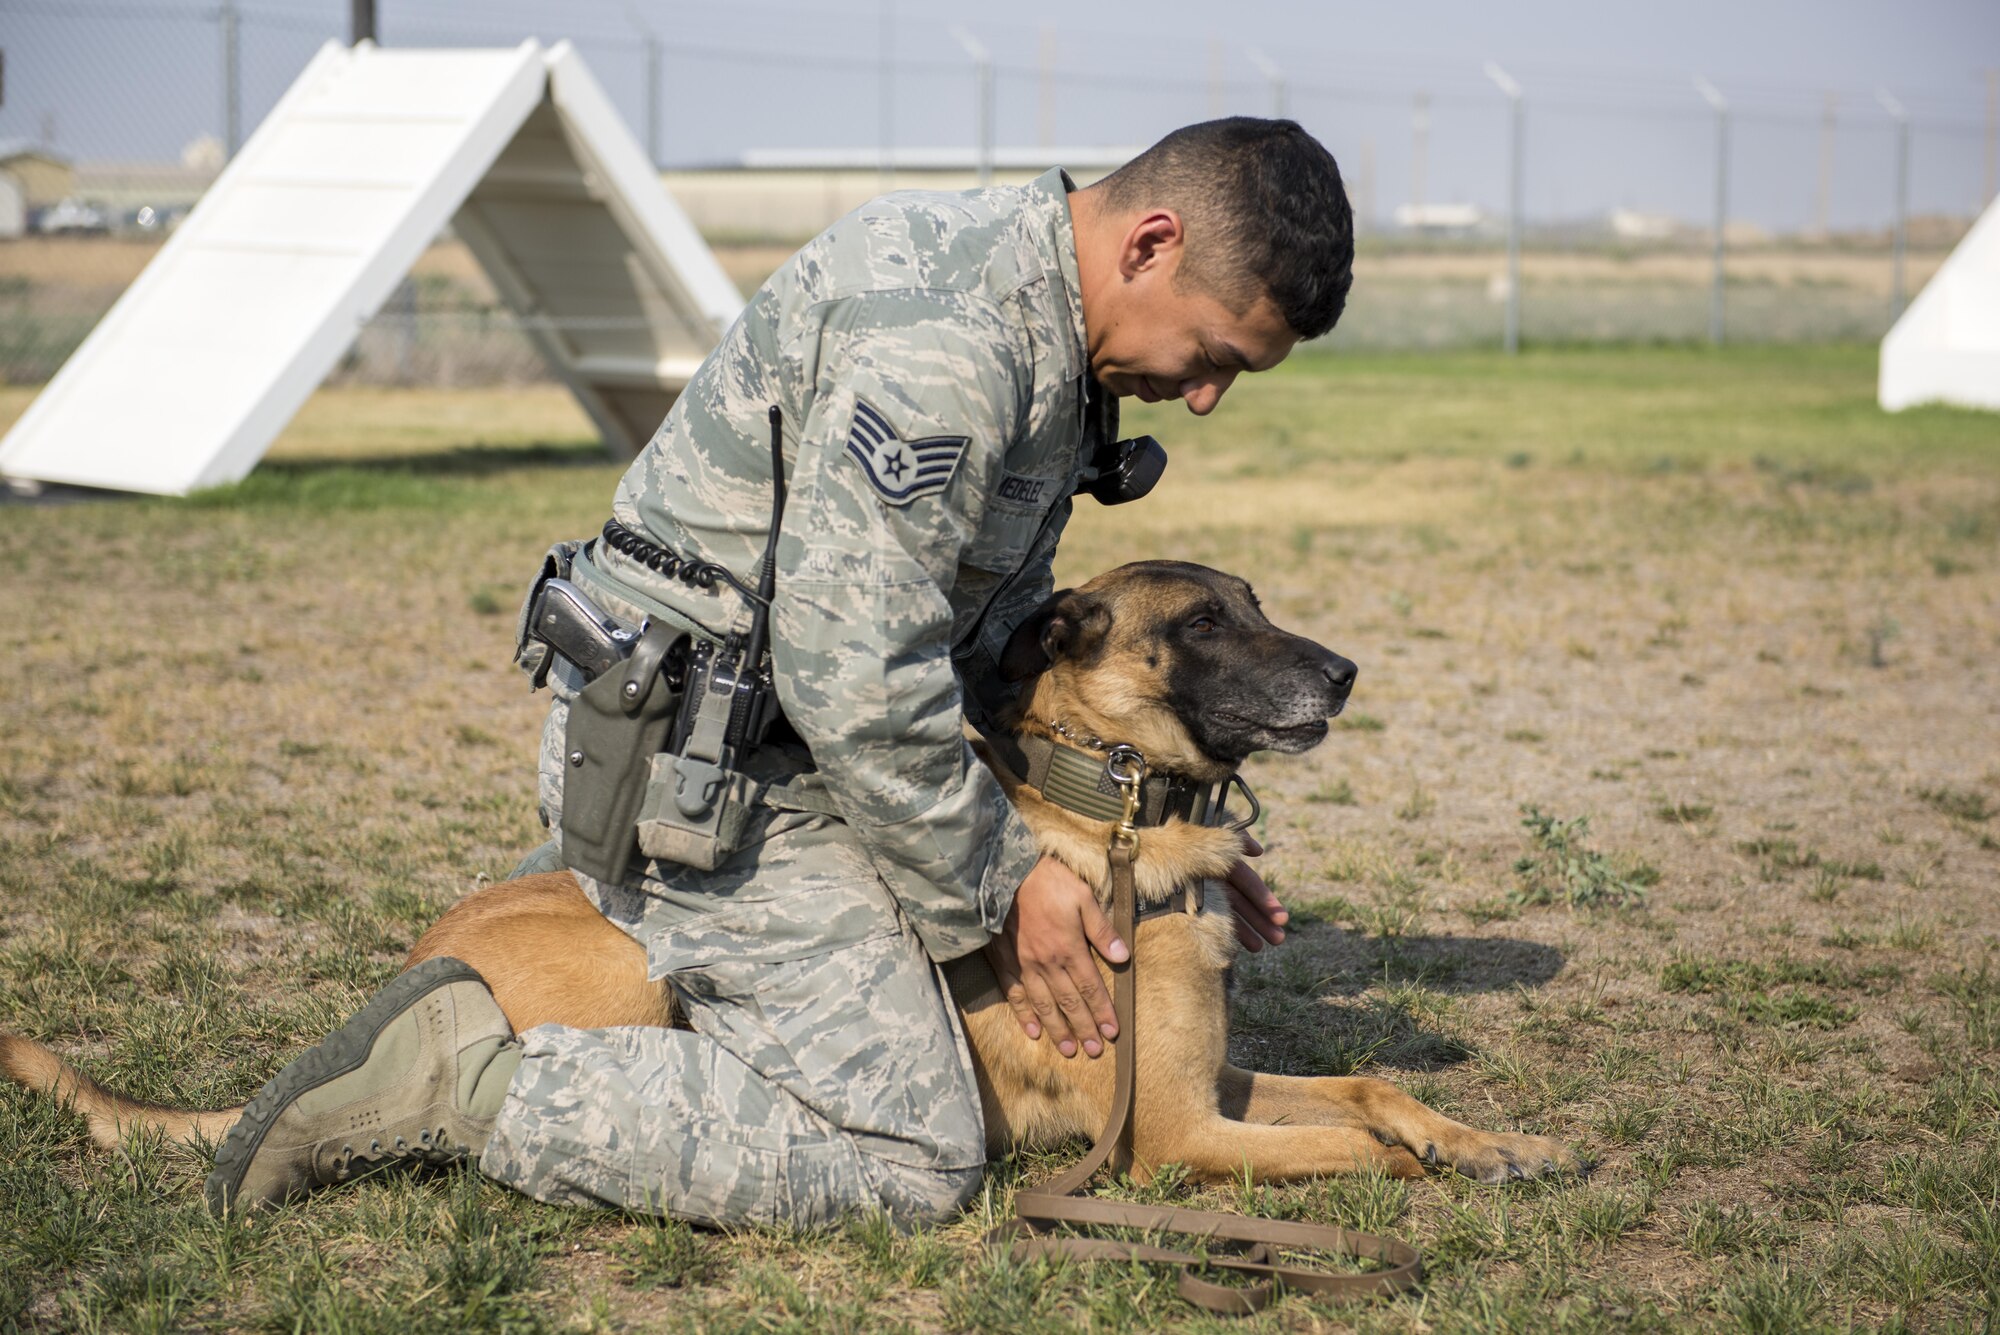 Staff Sgt. Lucas Medelez, 366th Security Forces military working dog handler, pats Vvass, 366th SFS military working dog, after a bite demo Aug. 21, 2015 at Mountain Home Air Force Base, Idaho. Vvass was the first dog Medelez was certified on. (U.S. Air Force photo by Senior Airman Jeremy L. Mosier/Released)